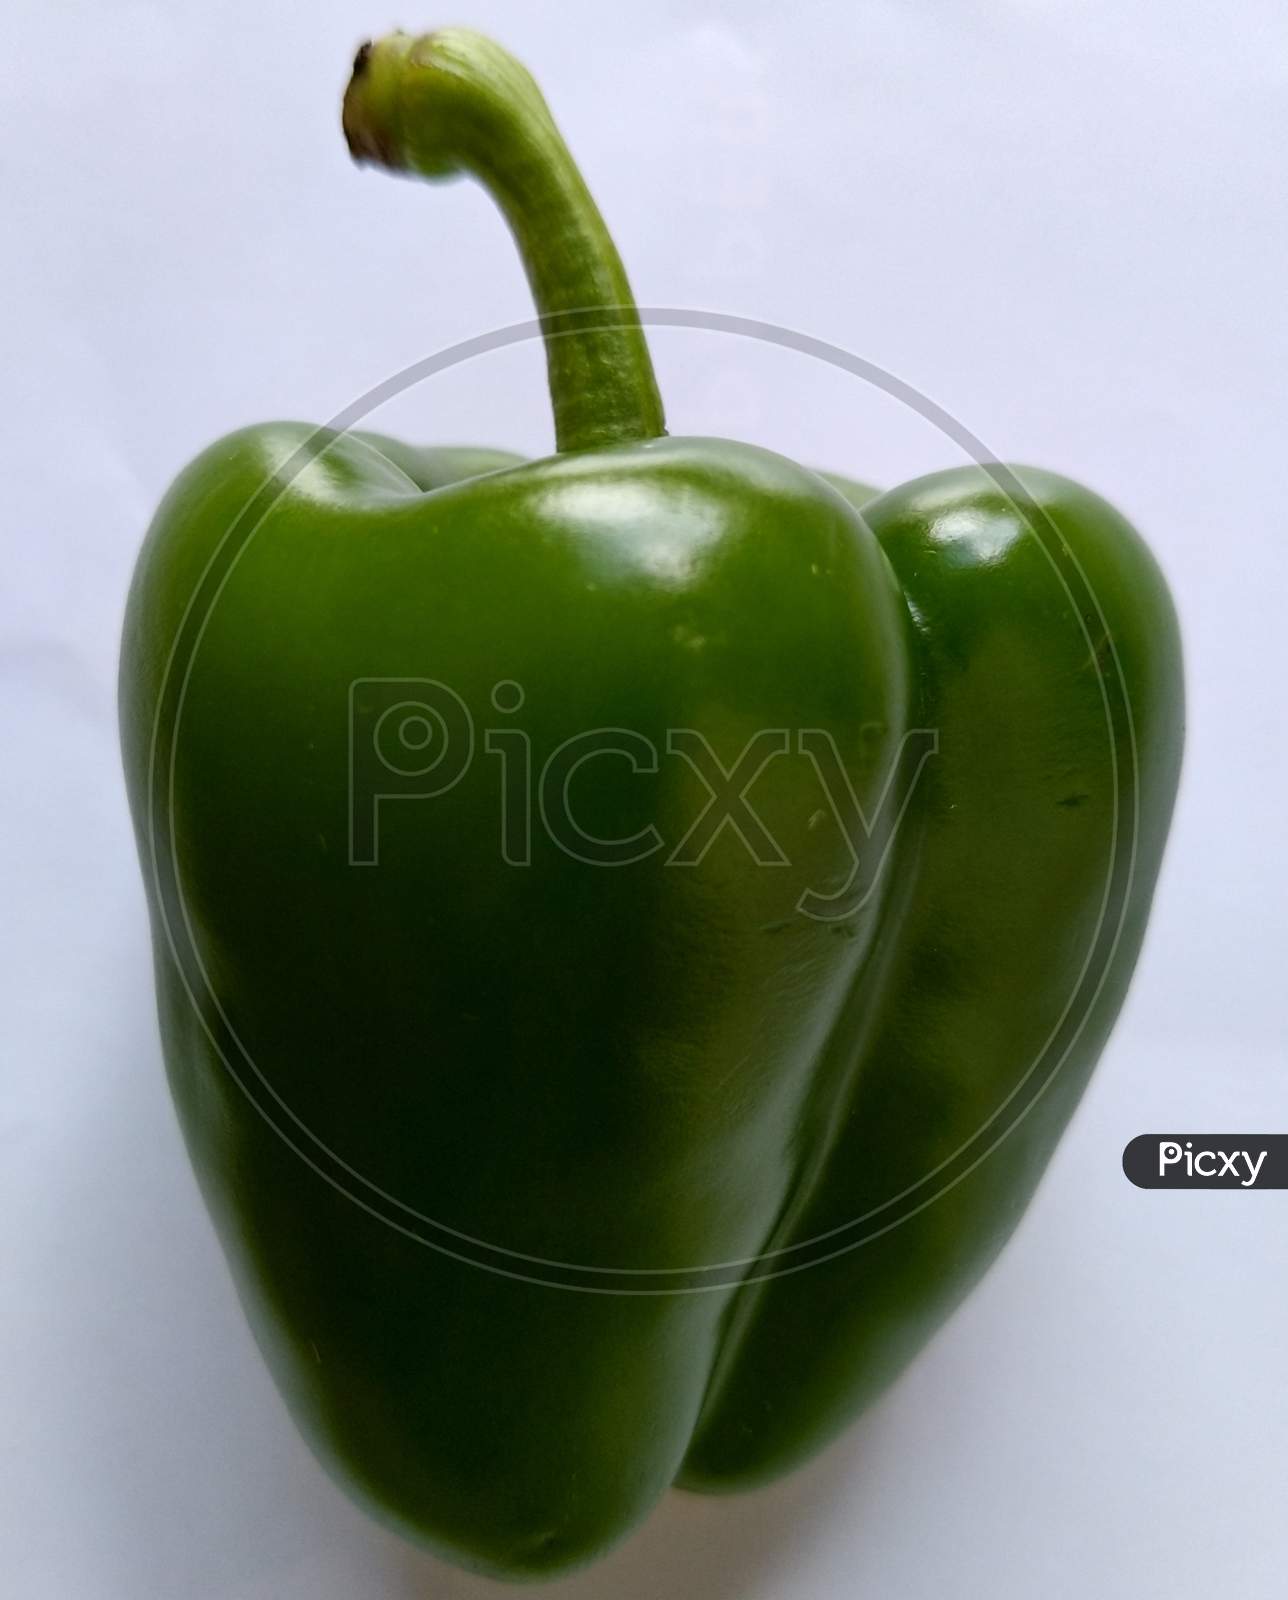 Green capsicum isolated on off-white background.